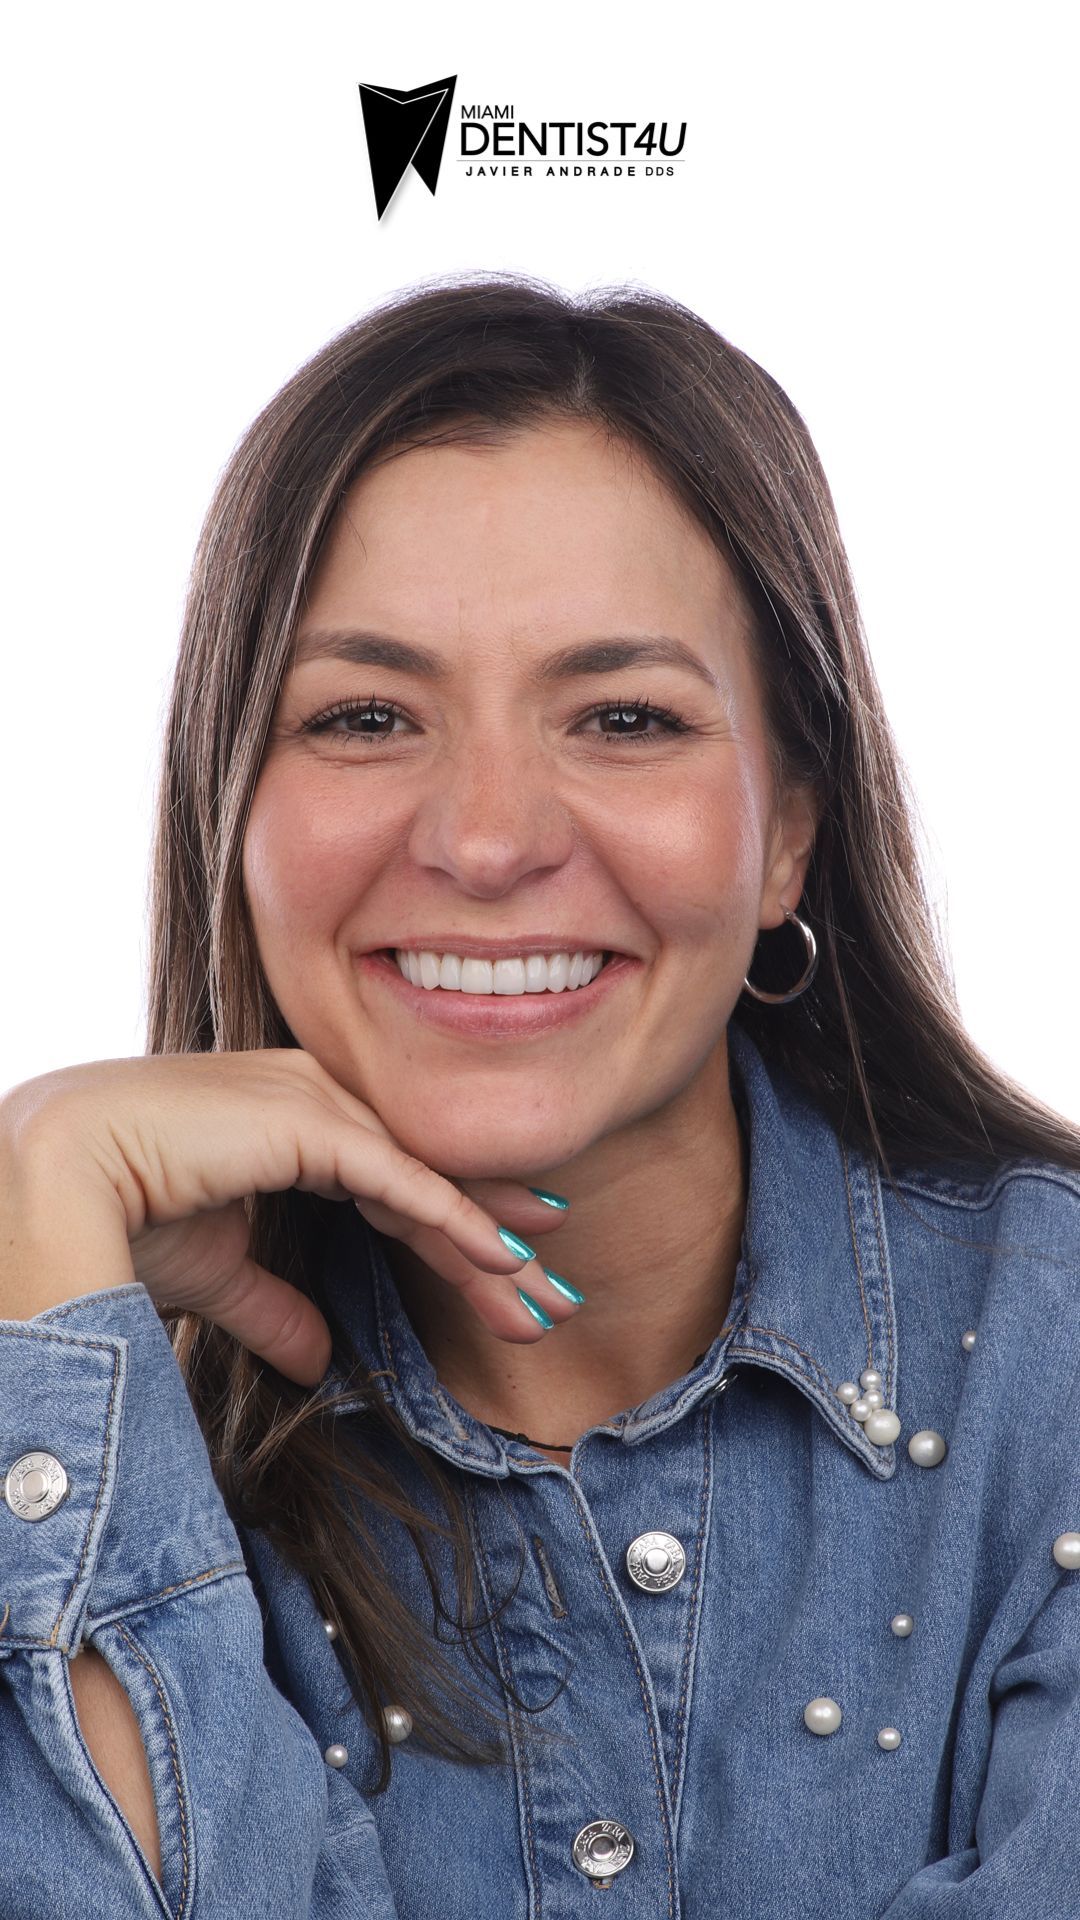 A woman in a denim shirt is smiling with her hand on her chin.